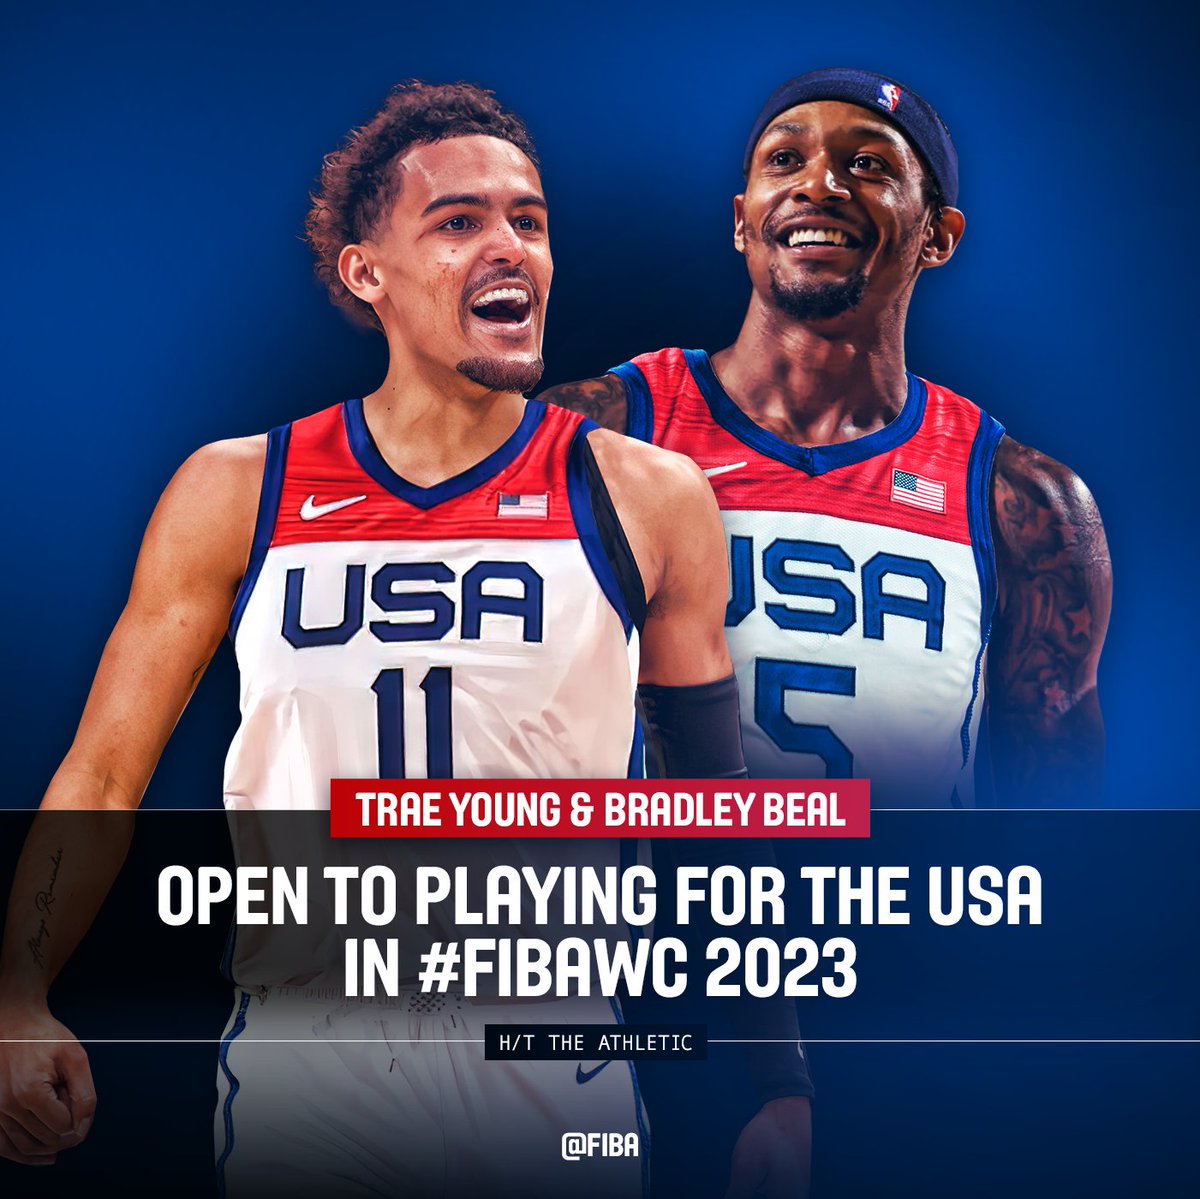 A new era of Dream Team? ✨🇺🇸 Trae Young and Bradley Beal say they are open to playing for Team USA in FIBA Basketball World Cup 2023! #FIBAWC x #WinForUSA